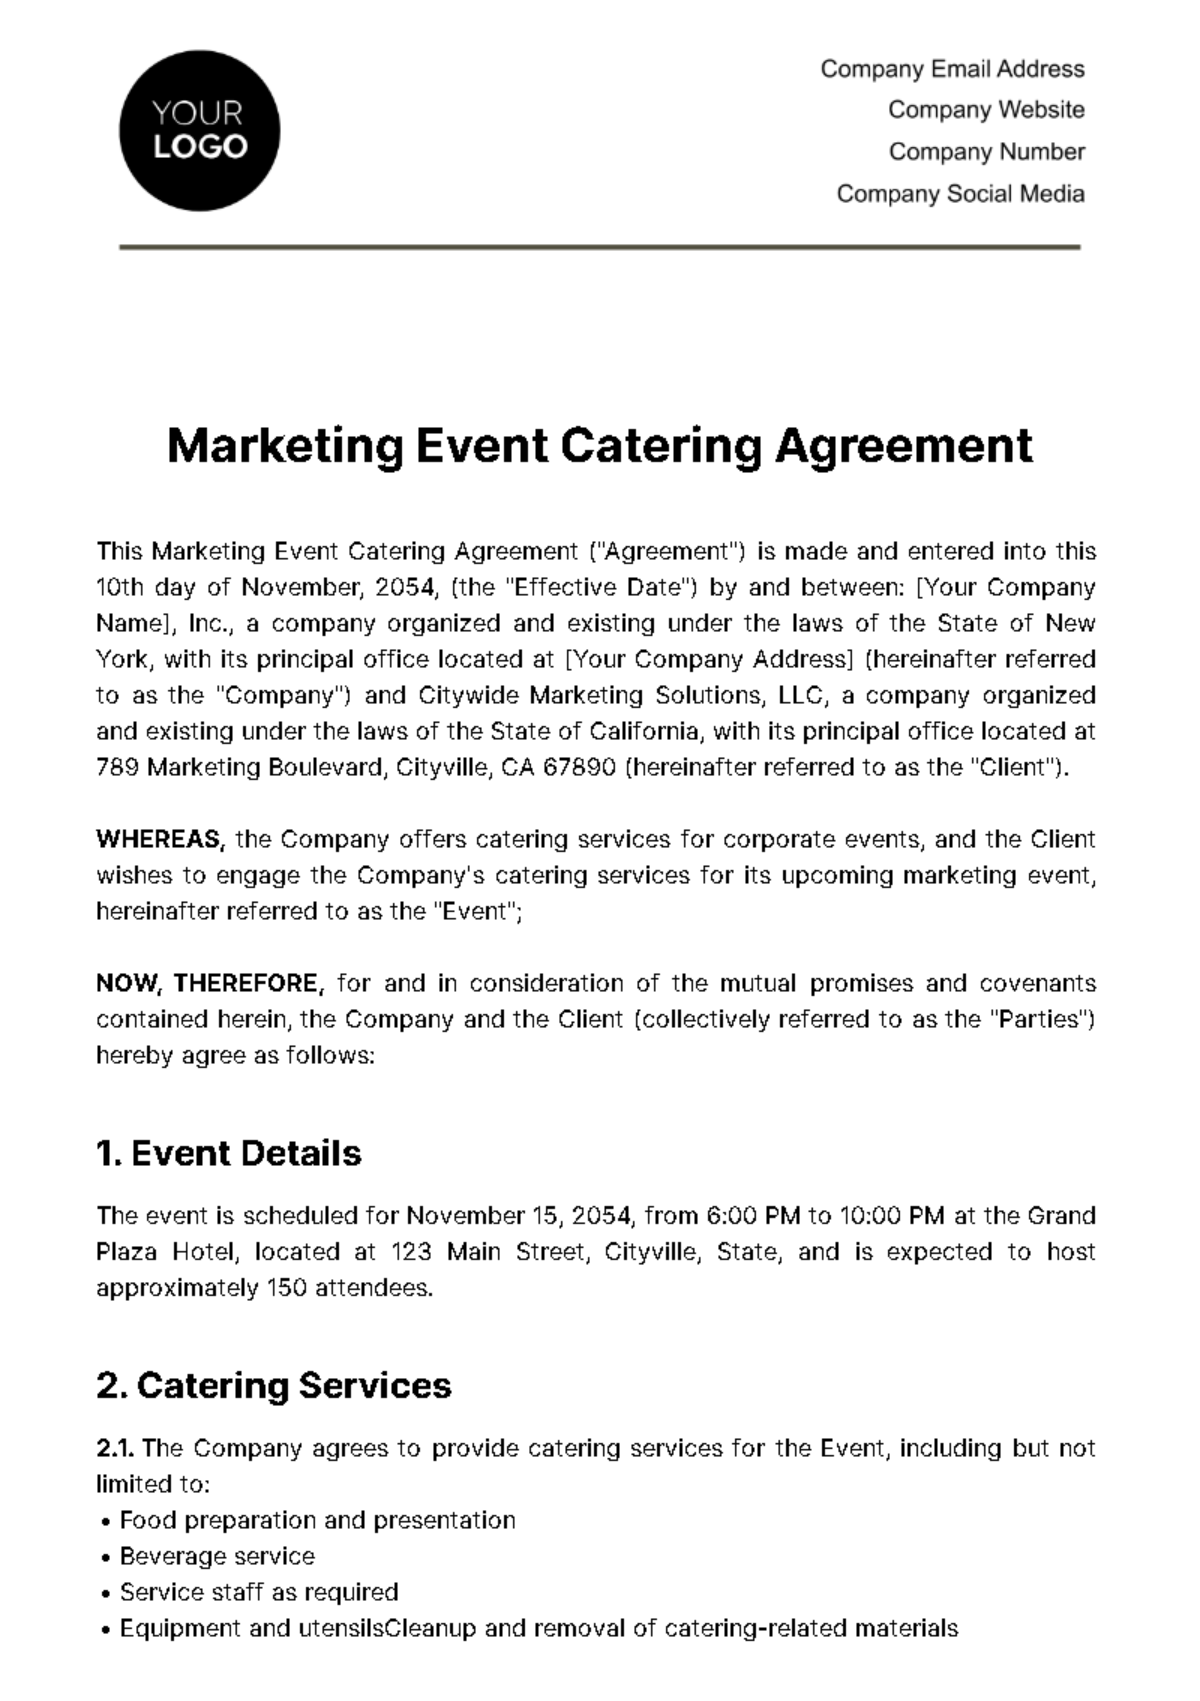 Free Marketing Event Catering Agreement Template